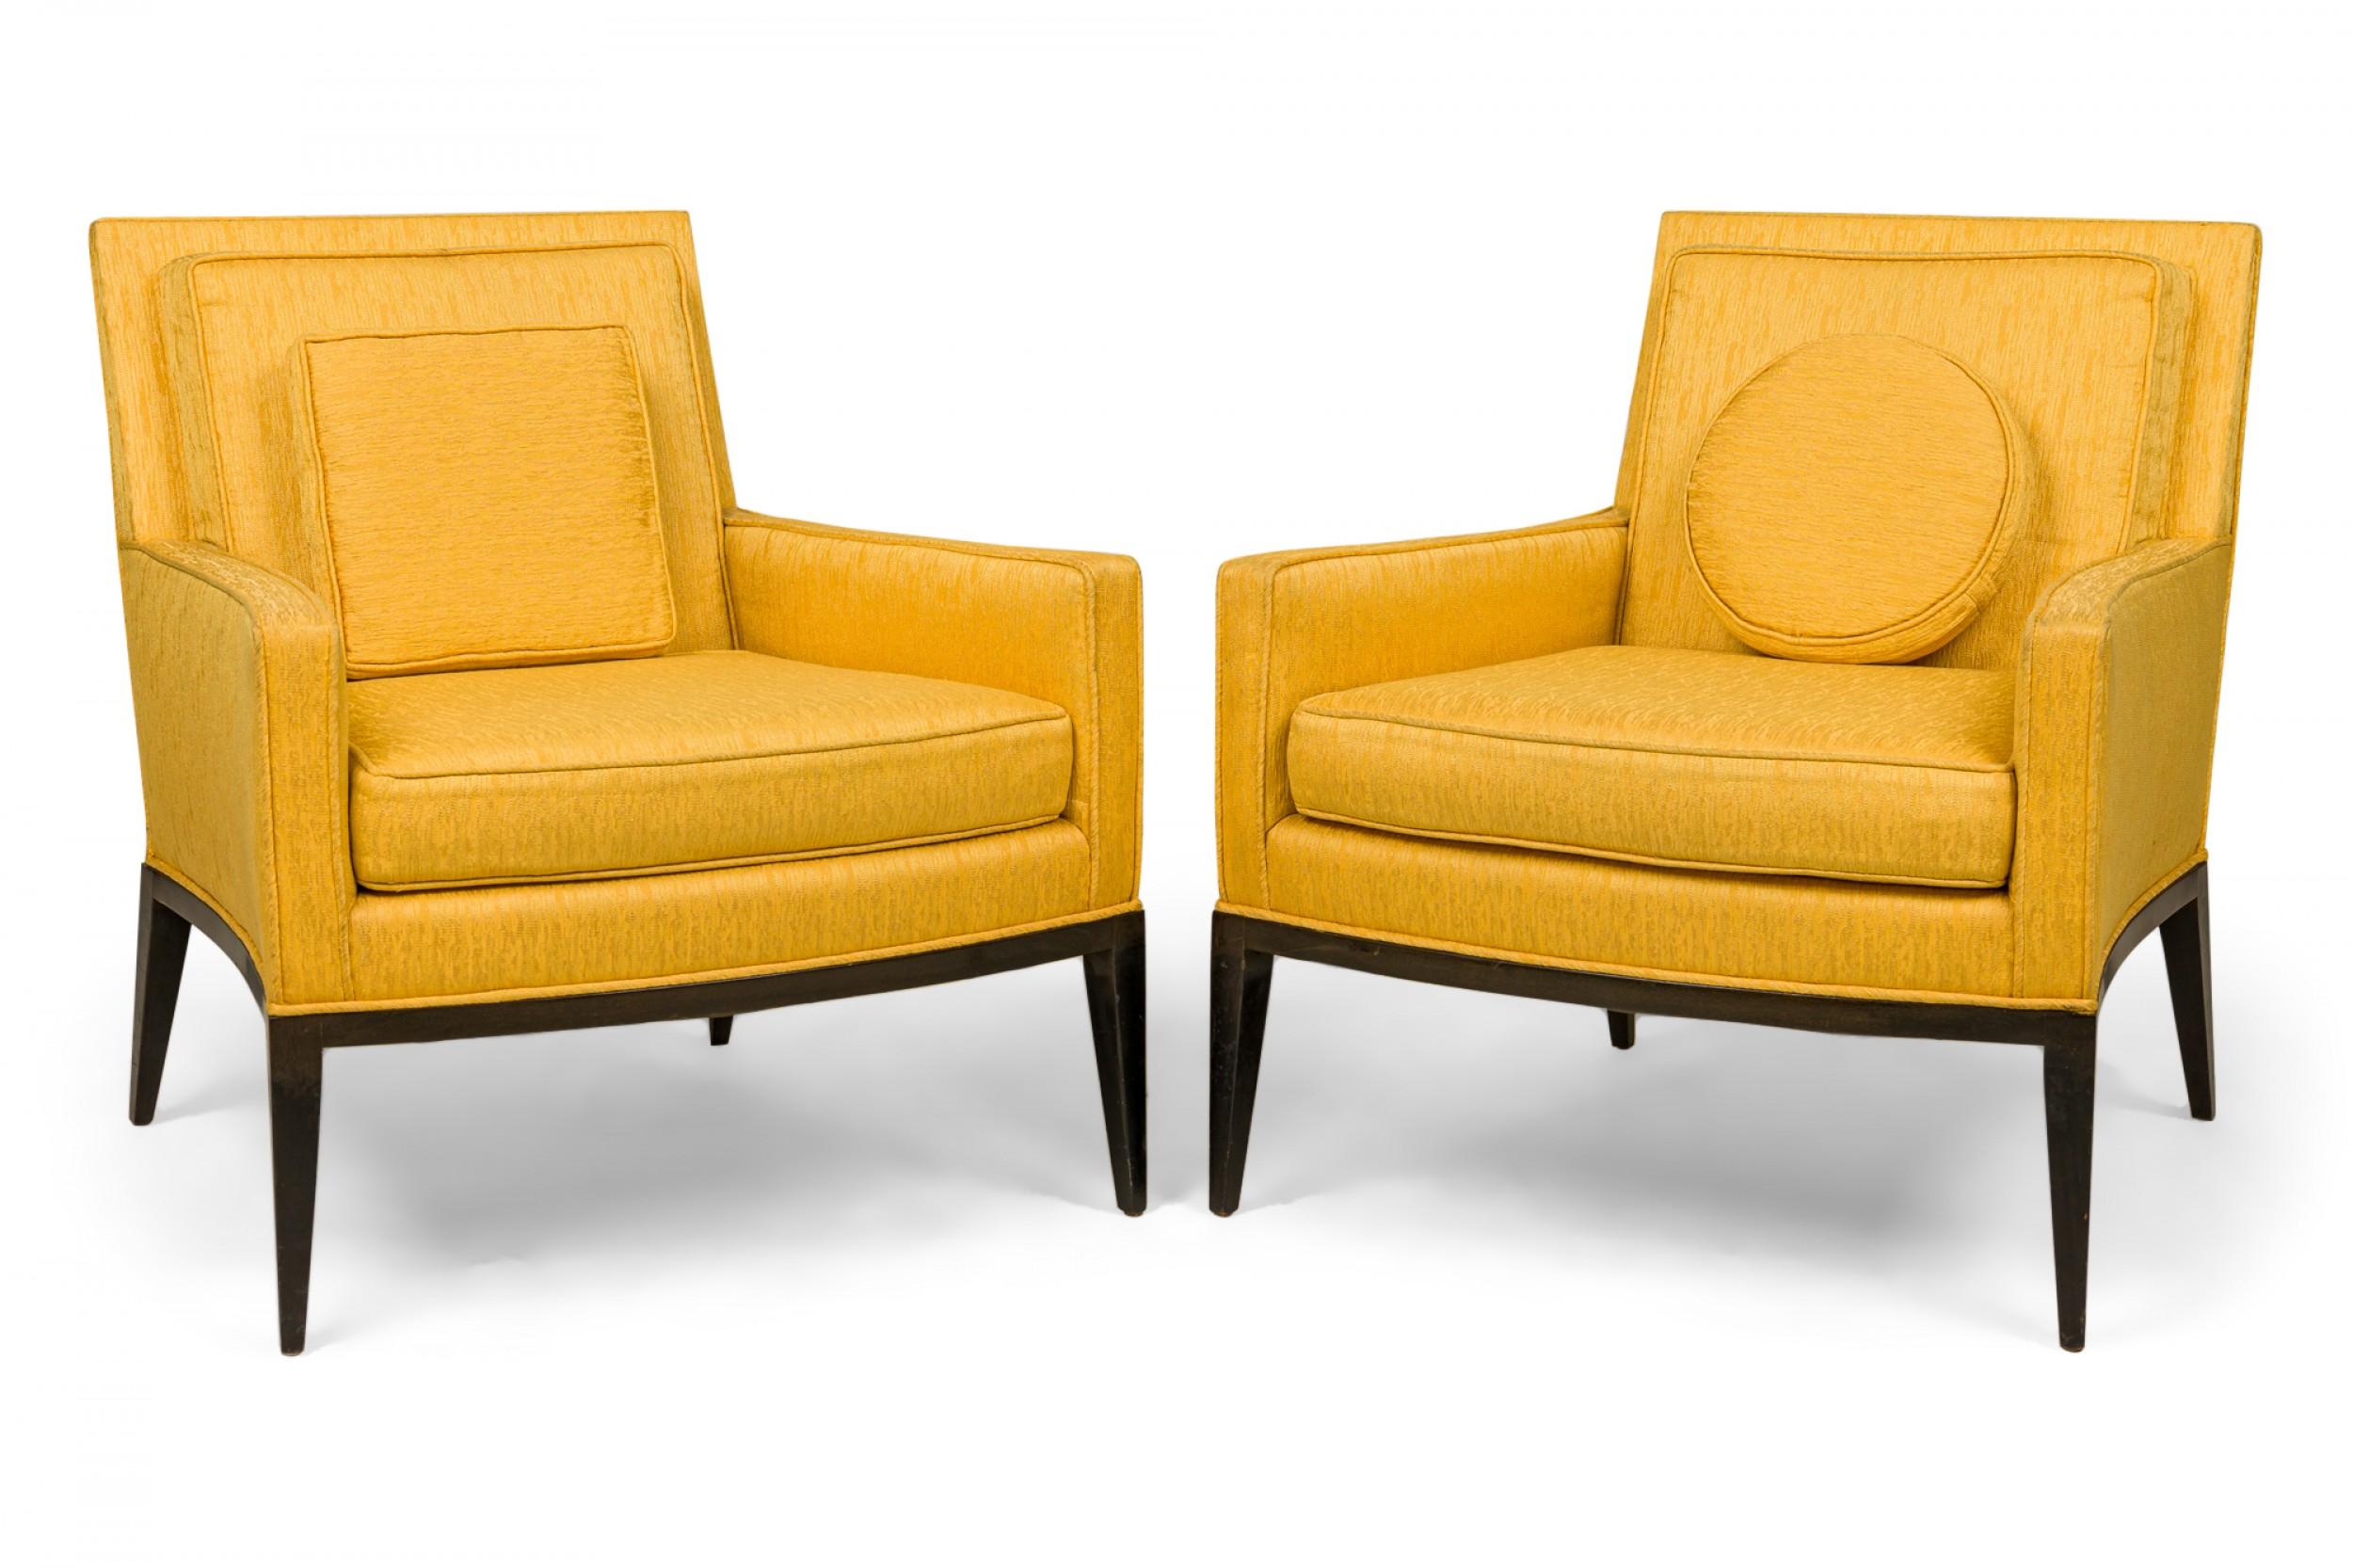 PAIR of American Mid-Century lounge / armchairs with bright yellow fabric upholstery with removable back and seat cushions, one square, and one circular matching throw pillow, resting on ebonized wooden frames with four tapered legs. (HARVEY